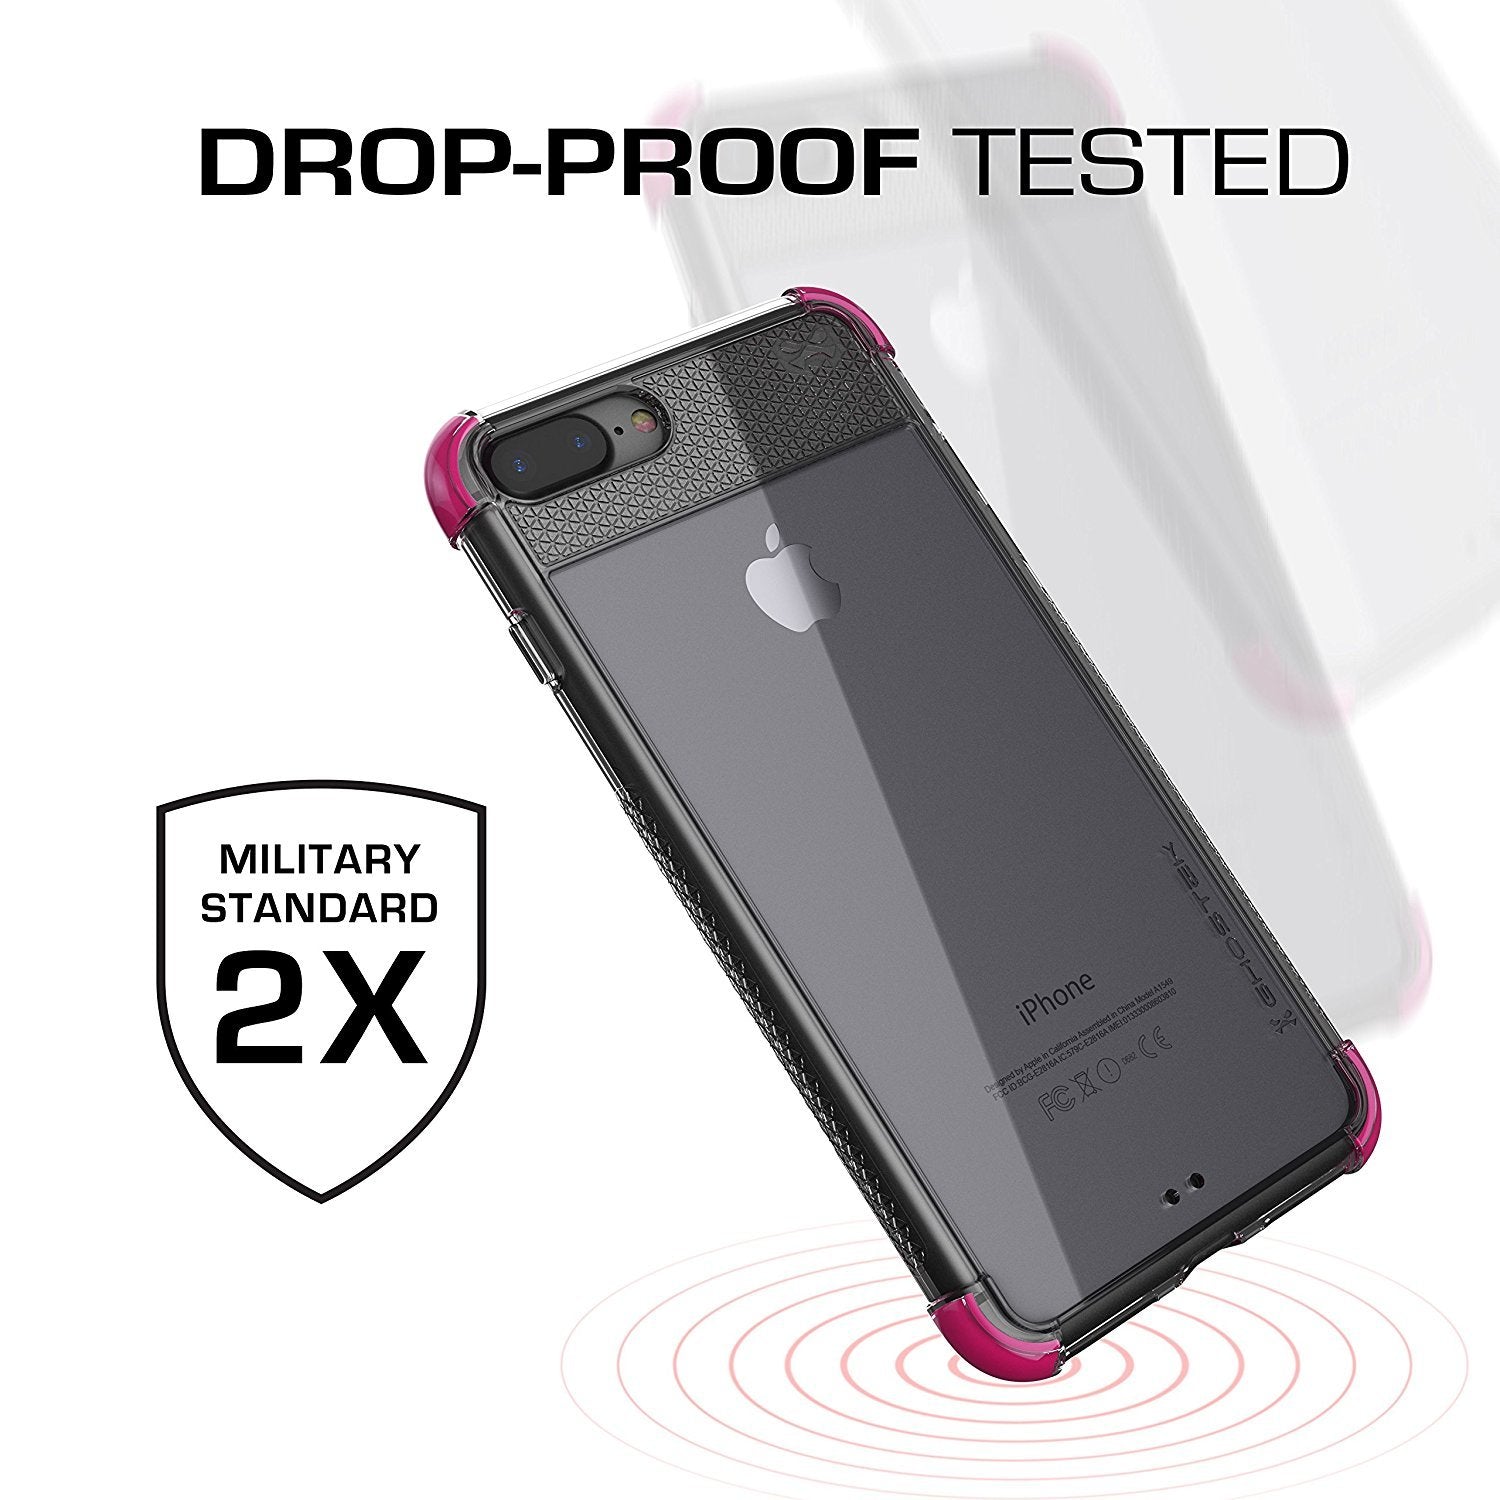 iPhone 8+ Plus Case, Ghostek Covert 2 Series for iPhone 8+ Plus Protective Case [ Pink] - PunkCase NZ